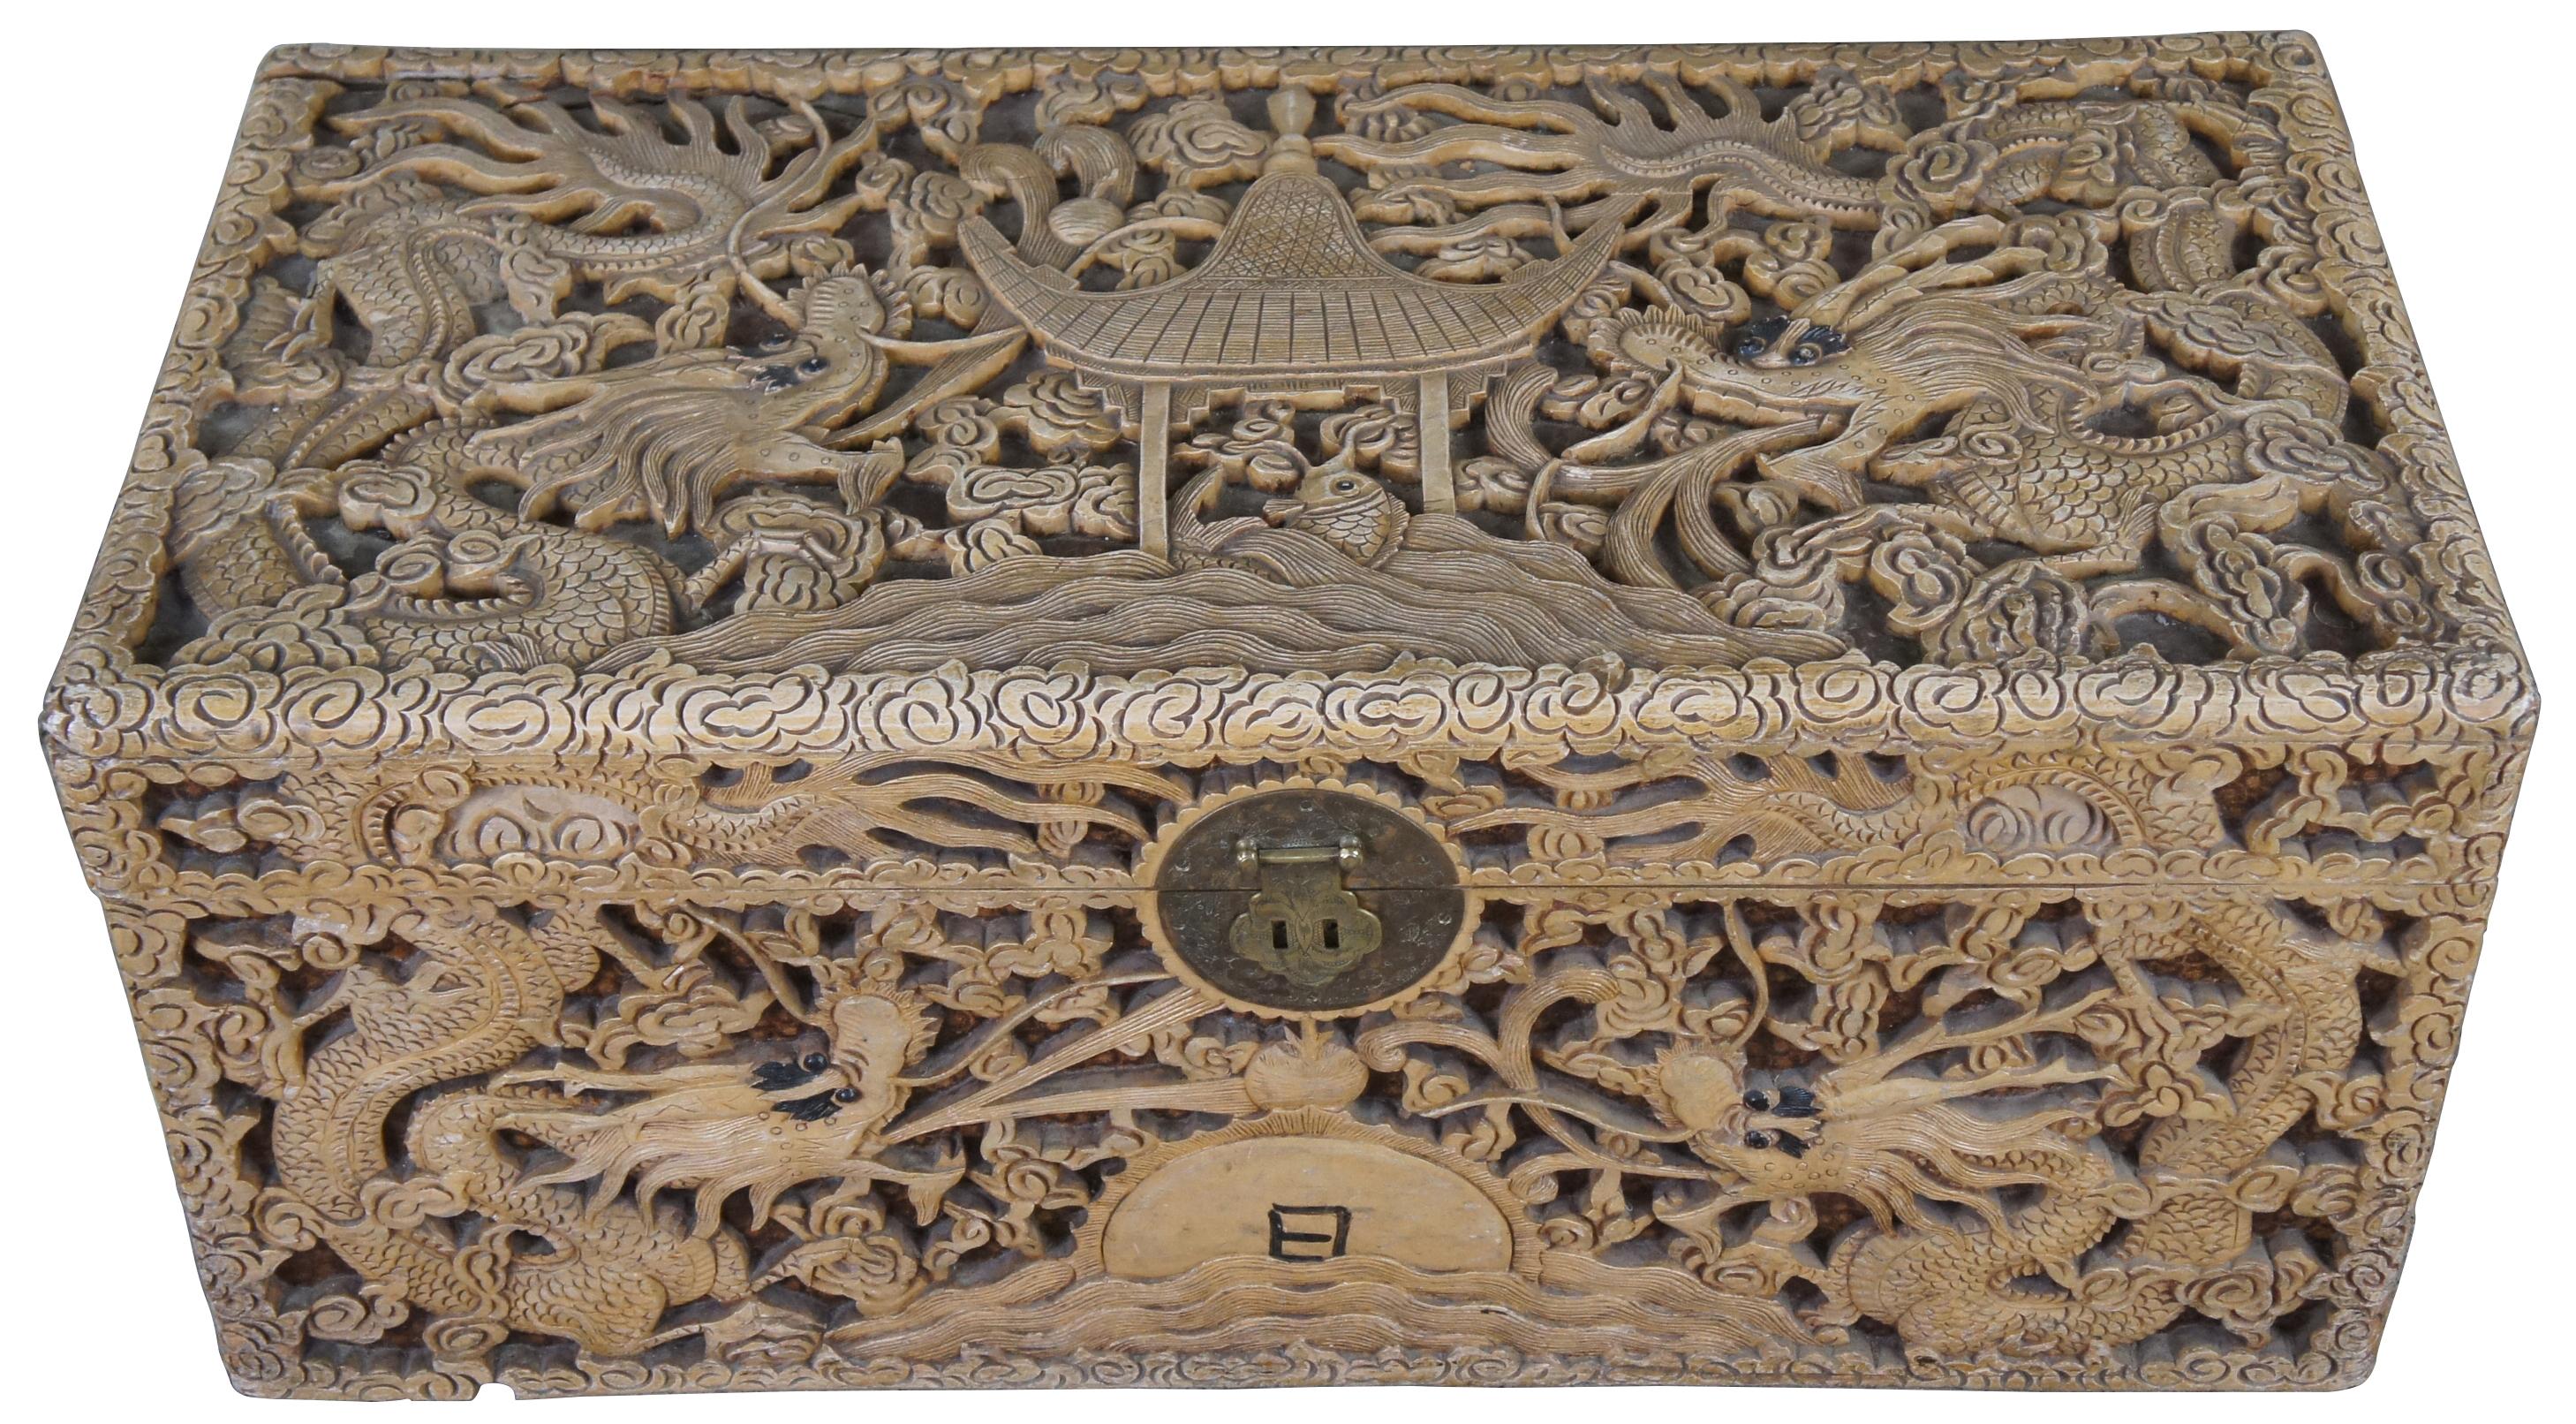 An exceptional and rare early 20th century camphor wood cehst. Profusely carved in high relief sculpting with fire breathing dragons amidst a field of clouds waterside sunset and pagoda scene with fish. Features handles, brass center plate and paper